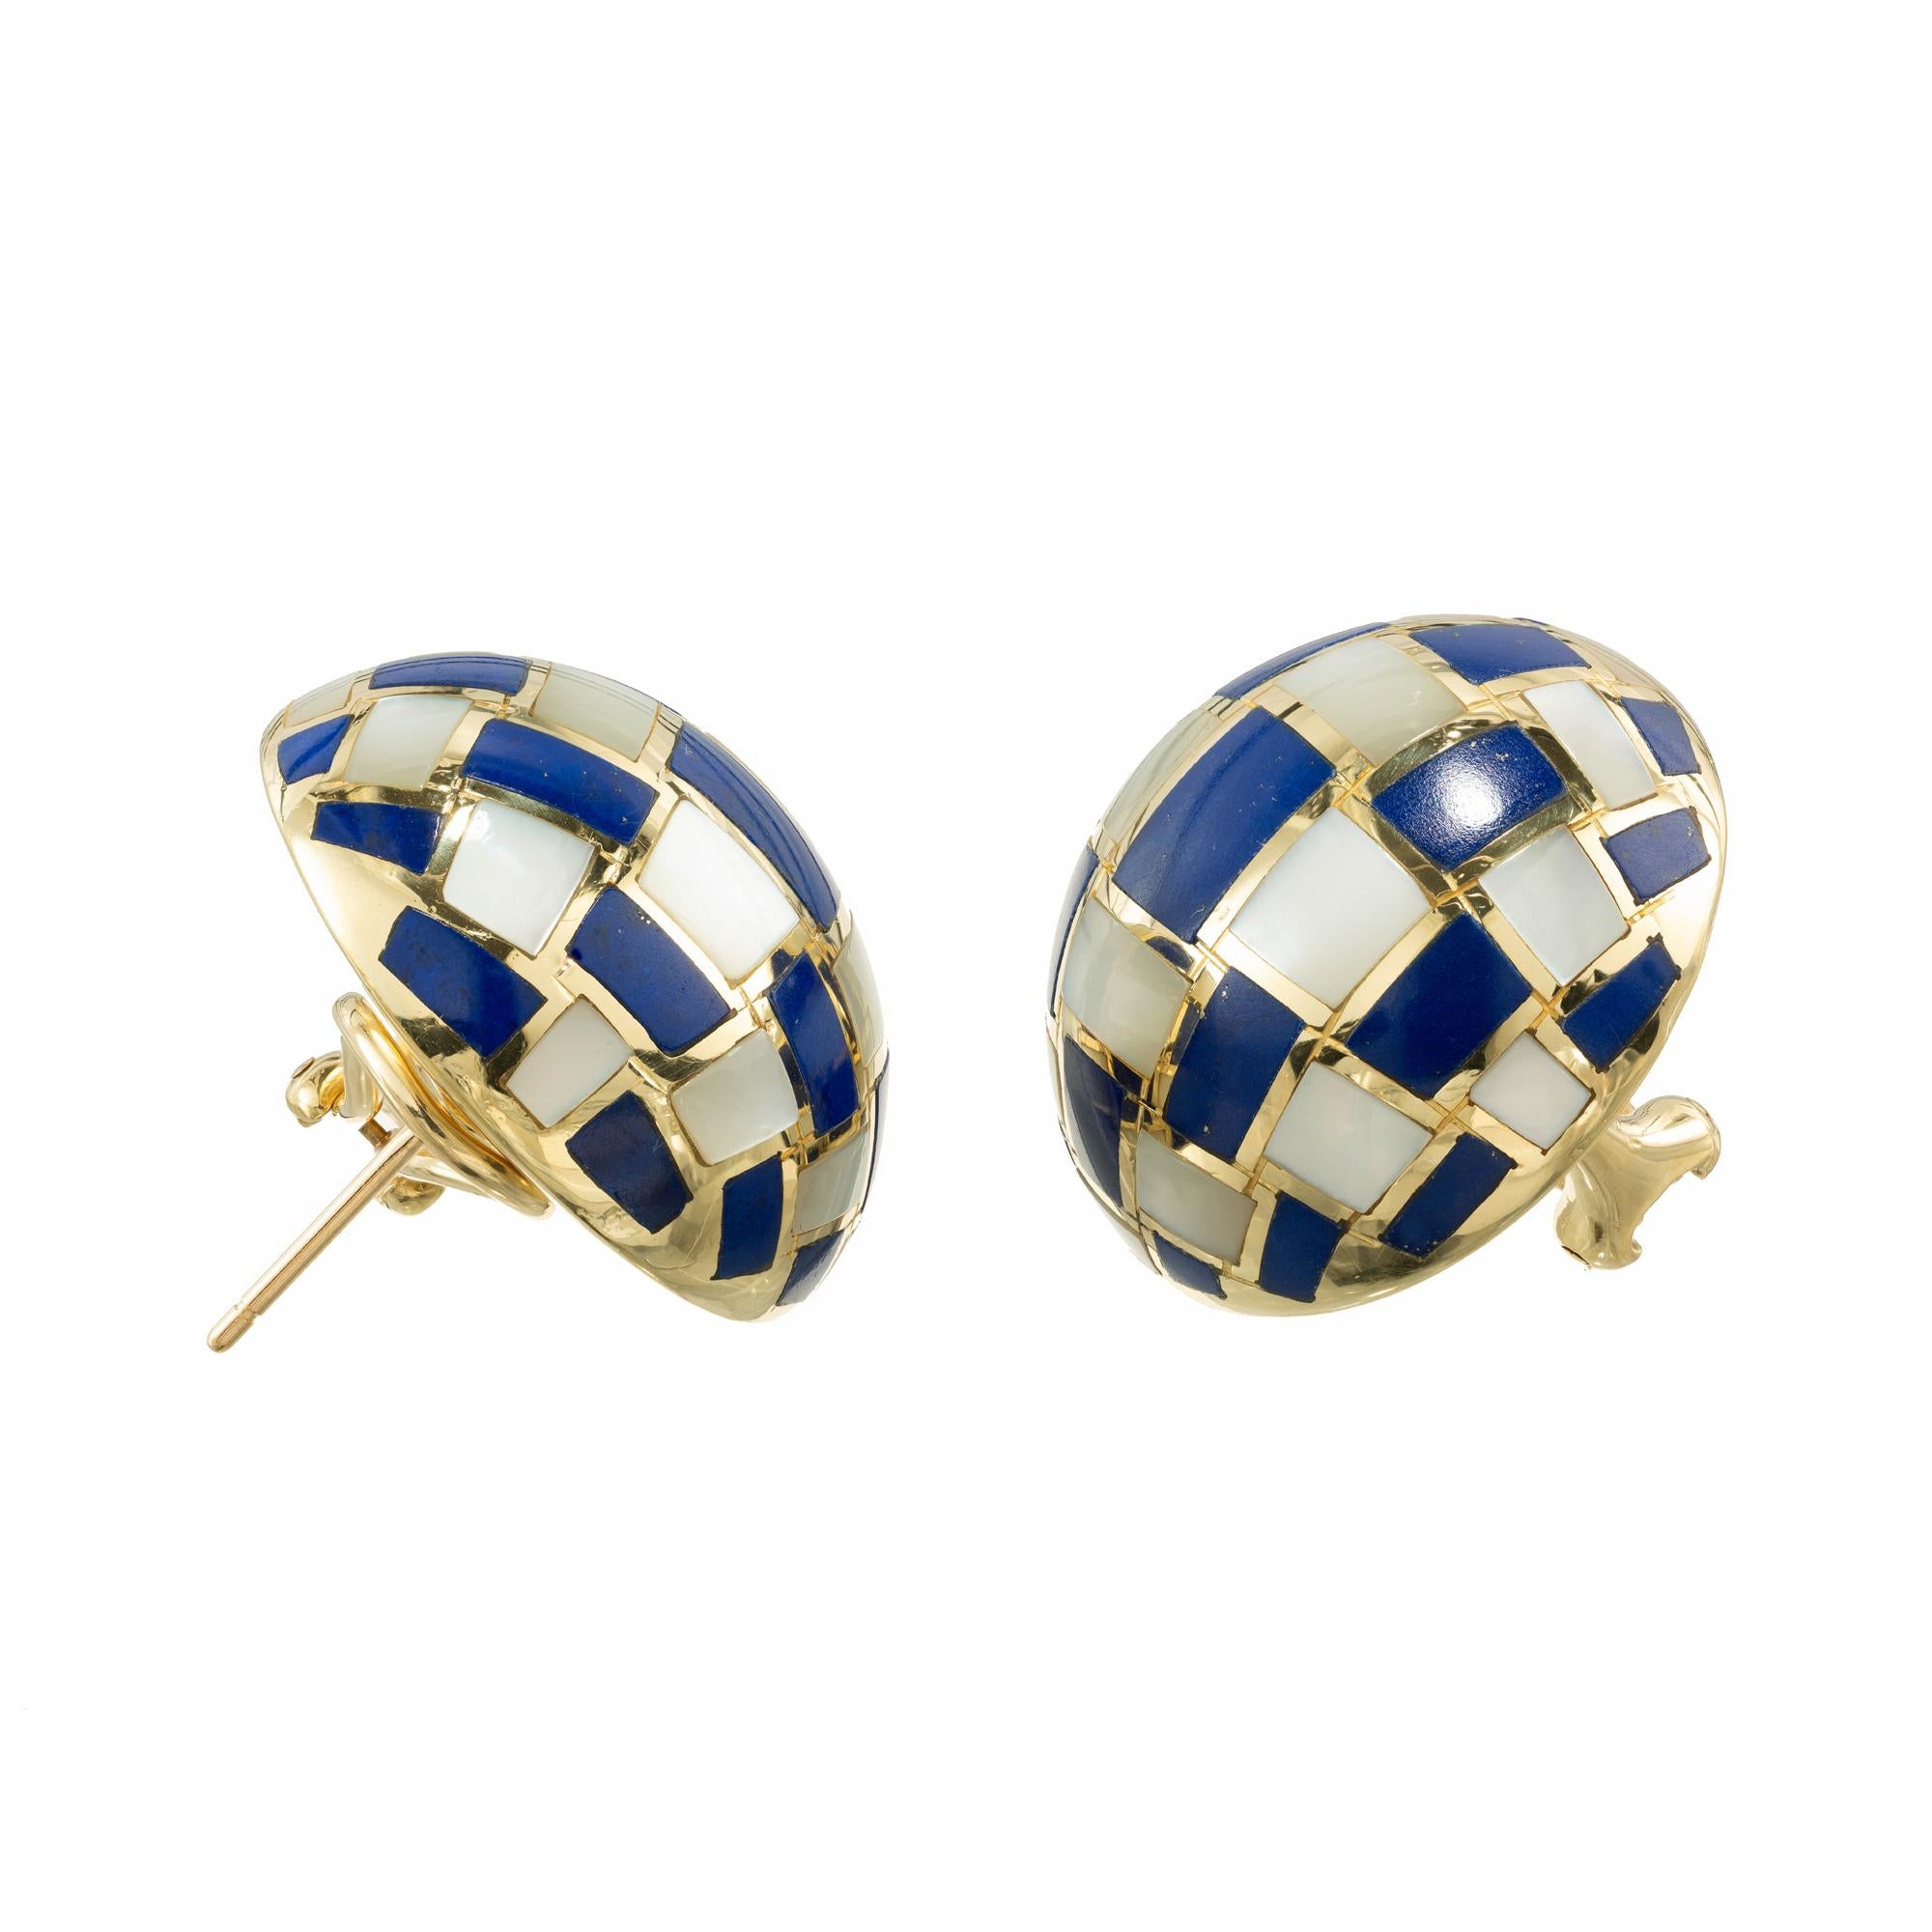 Tiffany & Co 18k yellow gold dome earrings featuring a checkerboard pattern of inlaid mother of pearl and lapis lazuli rectangles outlined in wide lines of 18k yellow gold. Tiffany & Co stamped on earrings. T + Co stamped on posts. 

Lapis